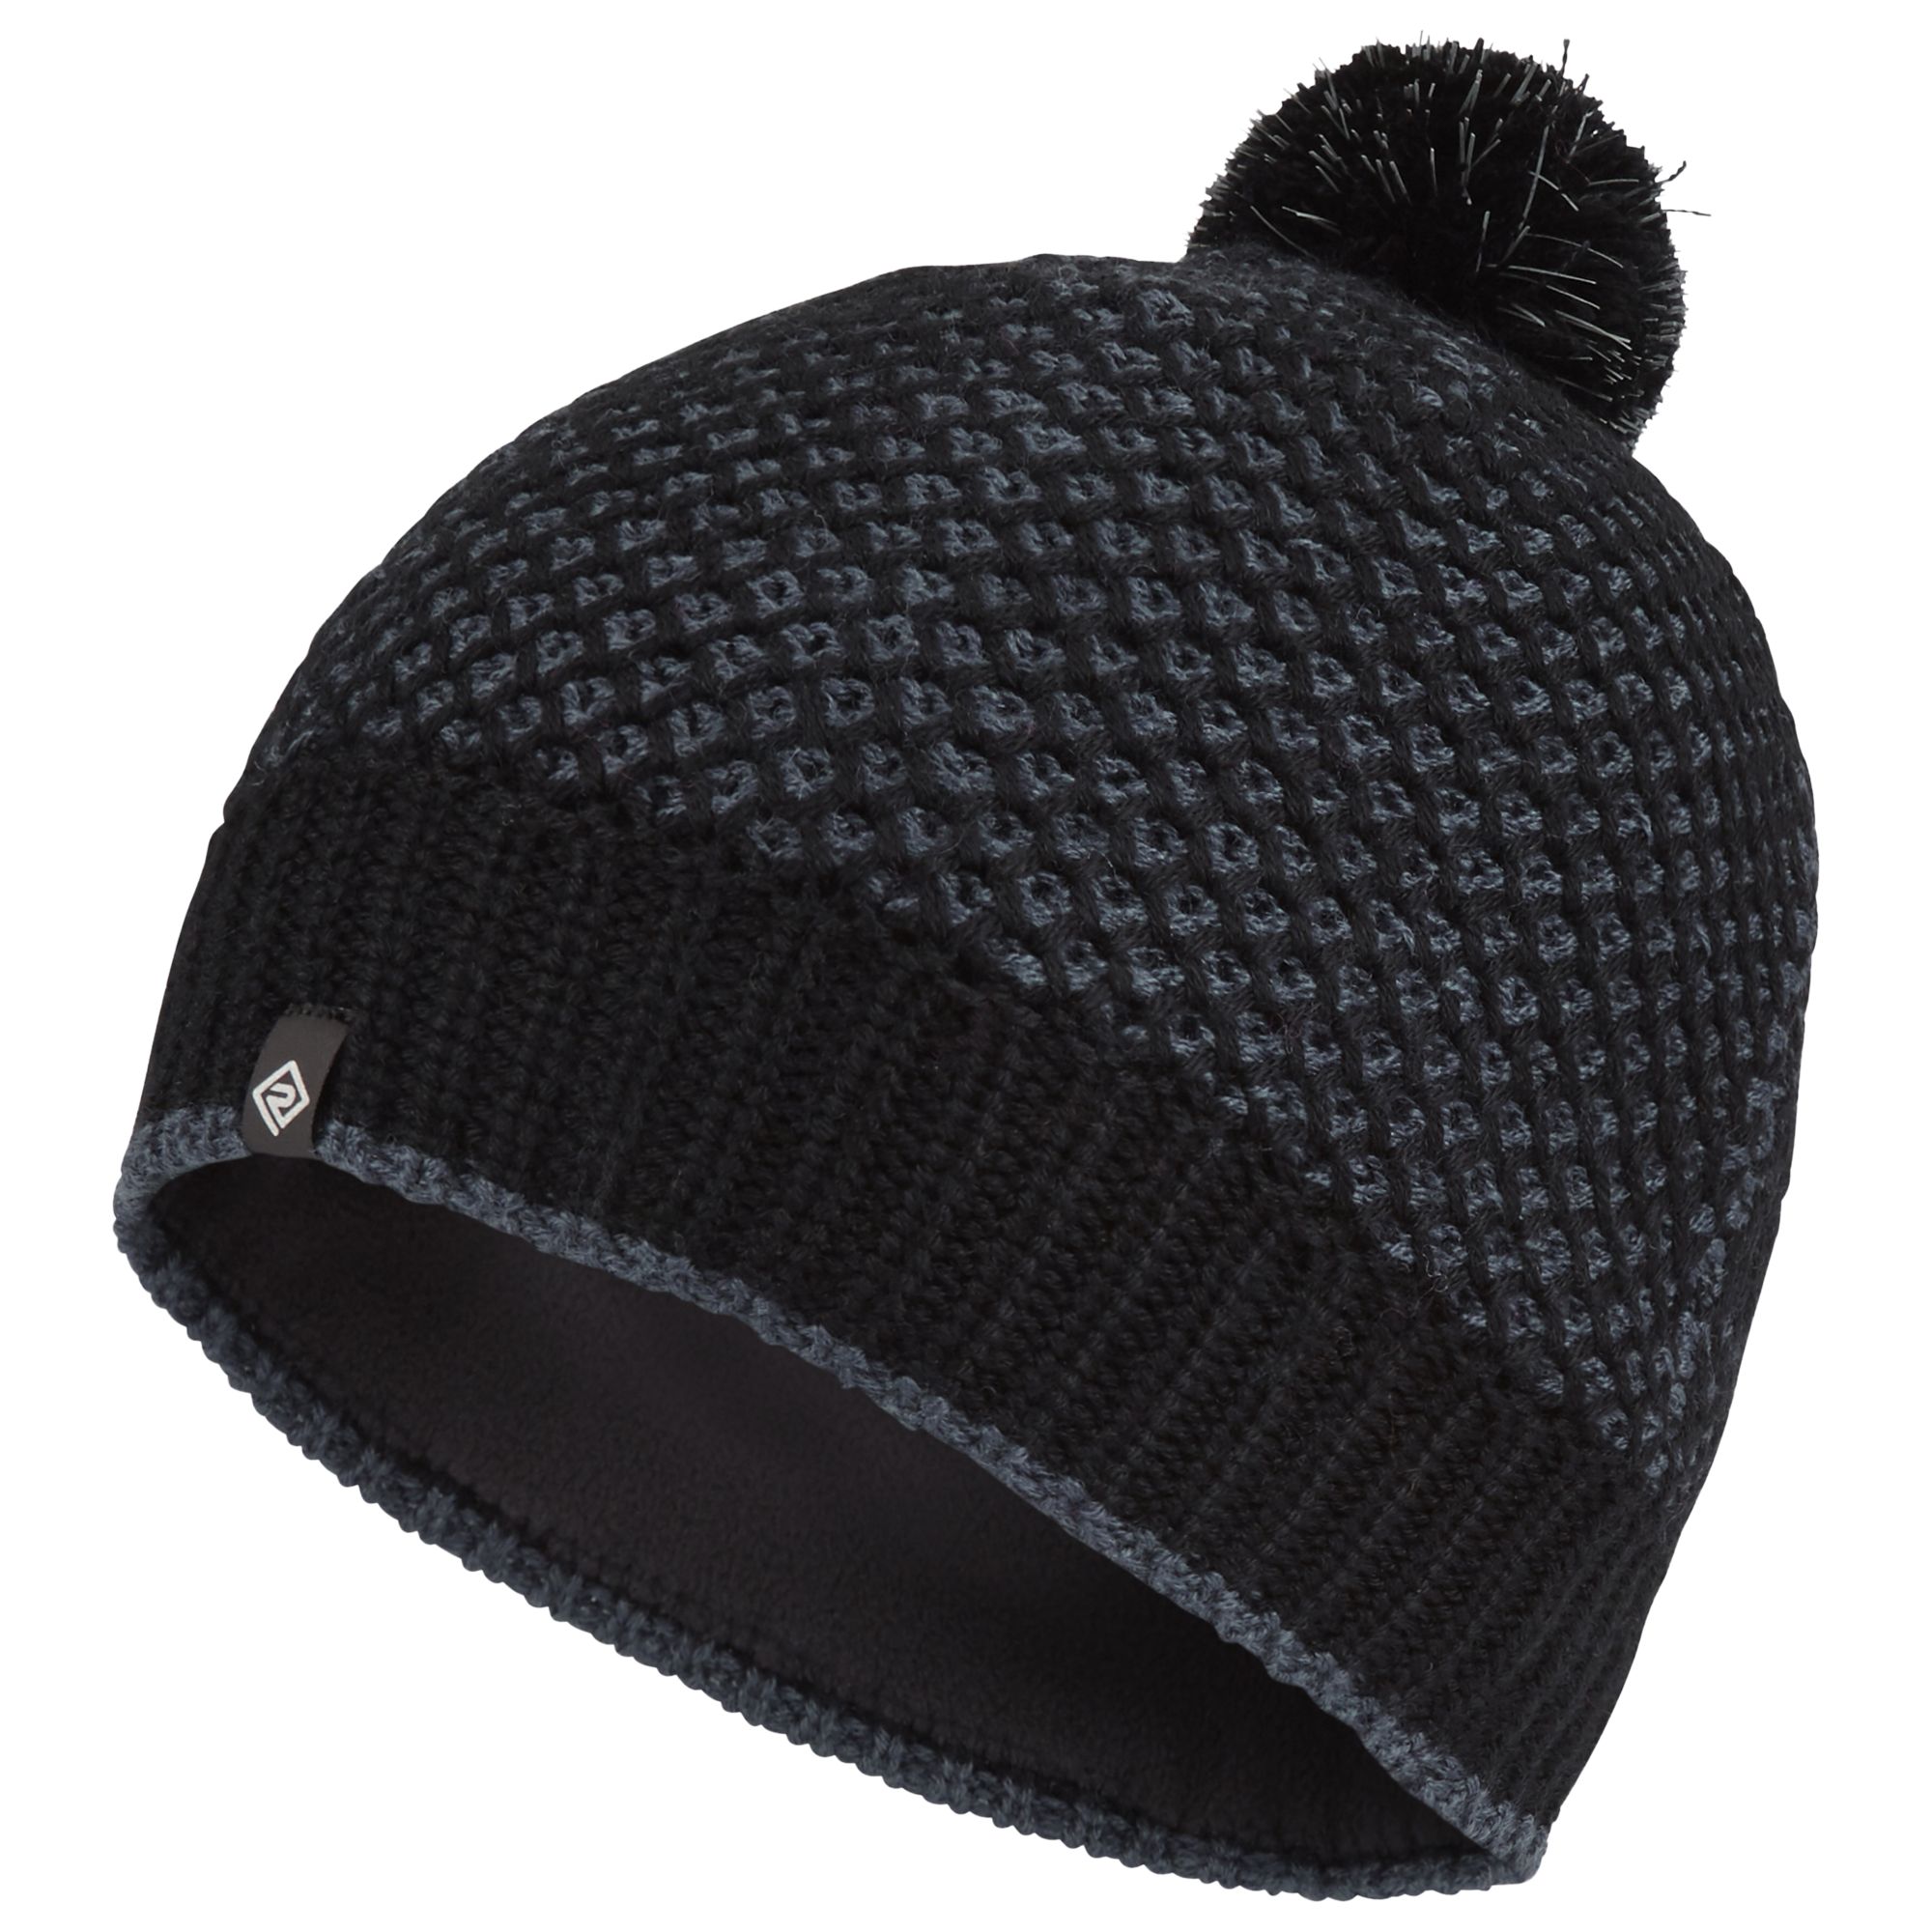 Ronhill Bobble Hat, One Size, Black/Charcoal